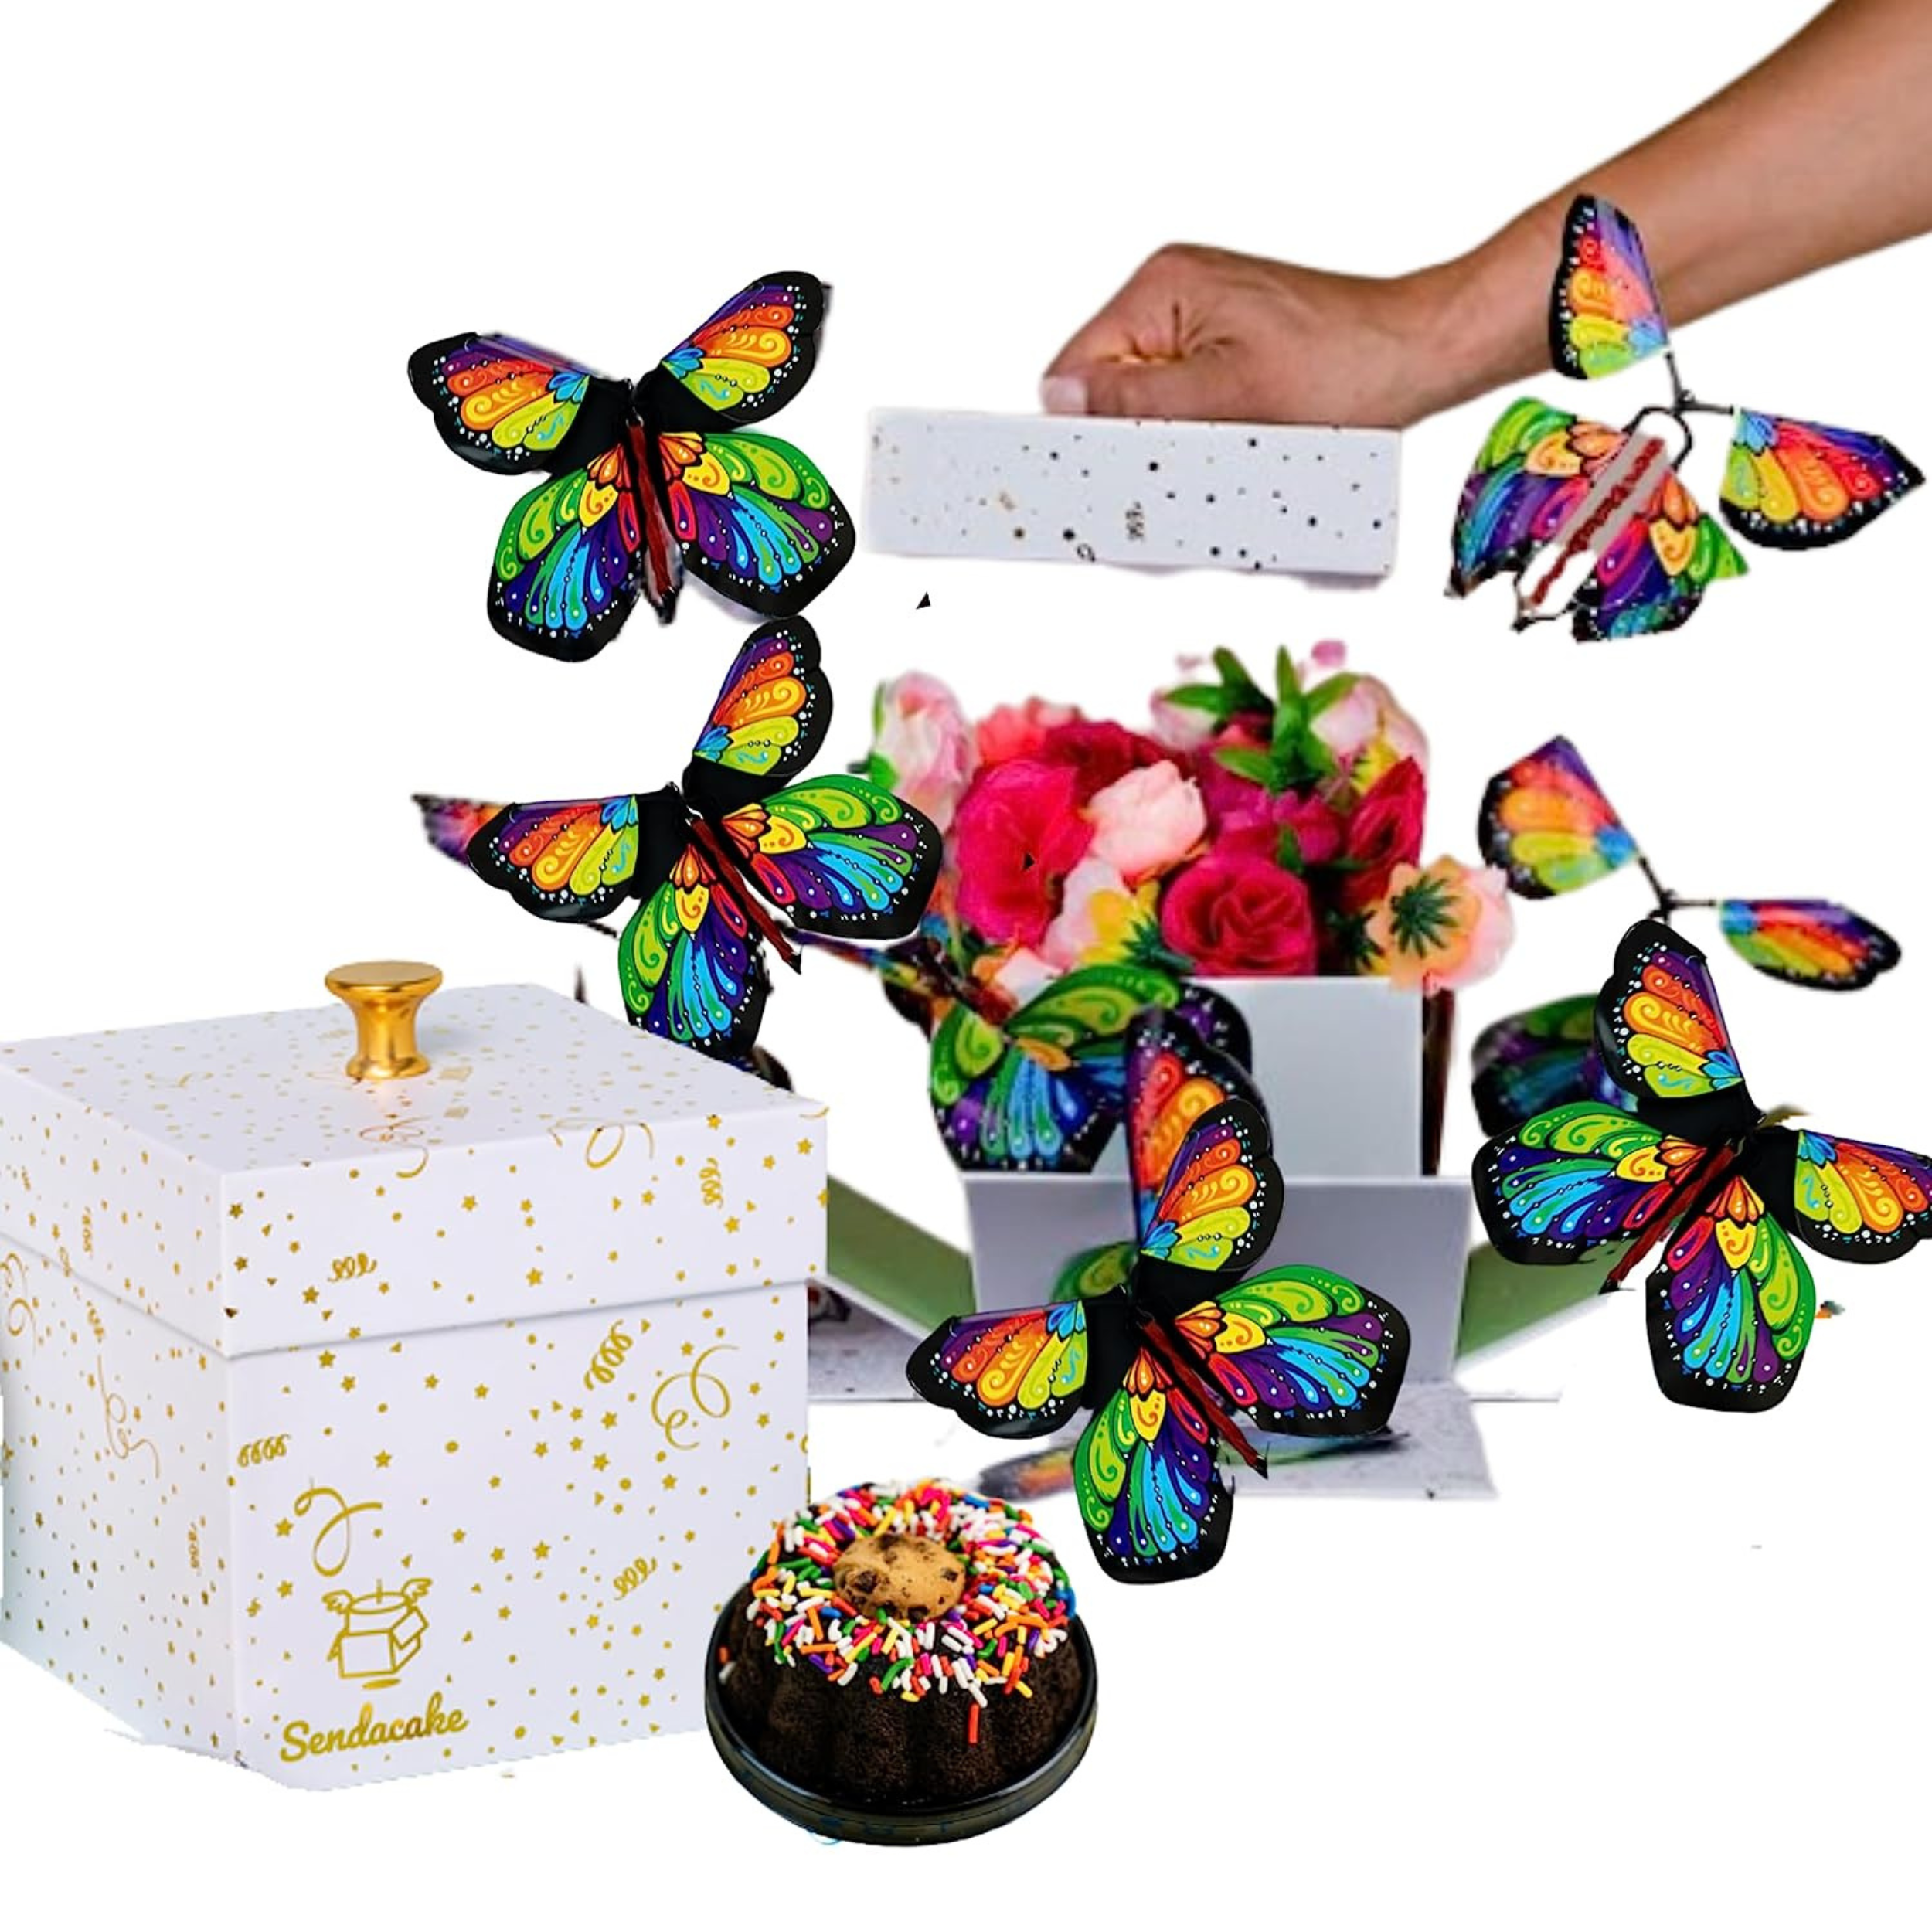 20 Pcs Magic Wind Up Flying Butterfly Surprise Box, Explosion Box in The Book Rubber Band Powered Magic Fairy Flying Toy, Easter Basket Stuffers Gifts